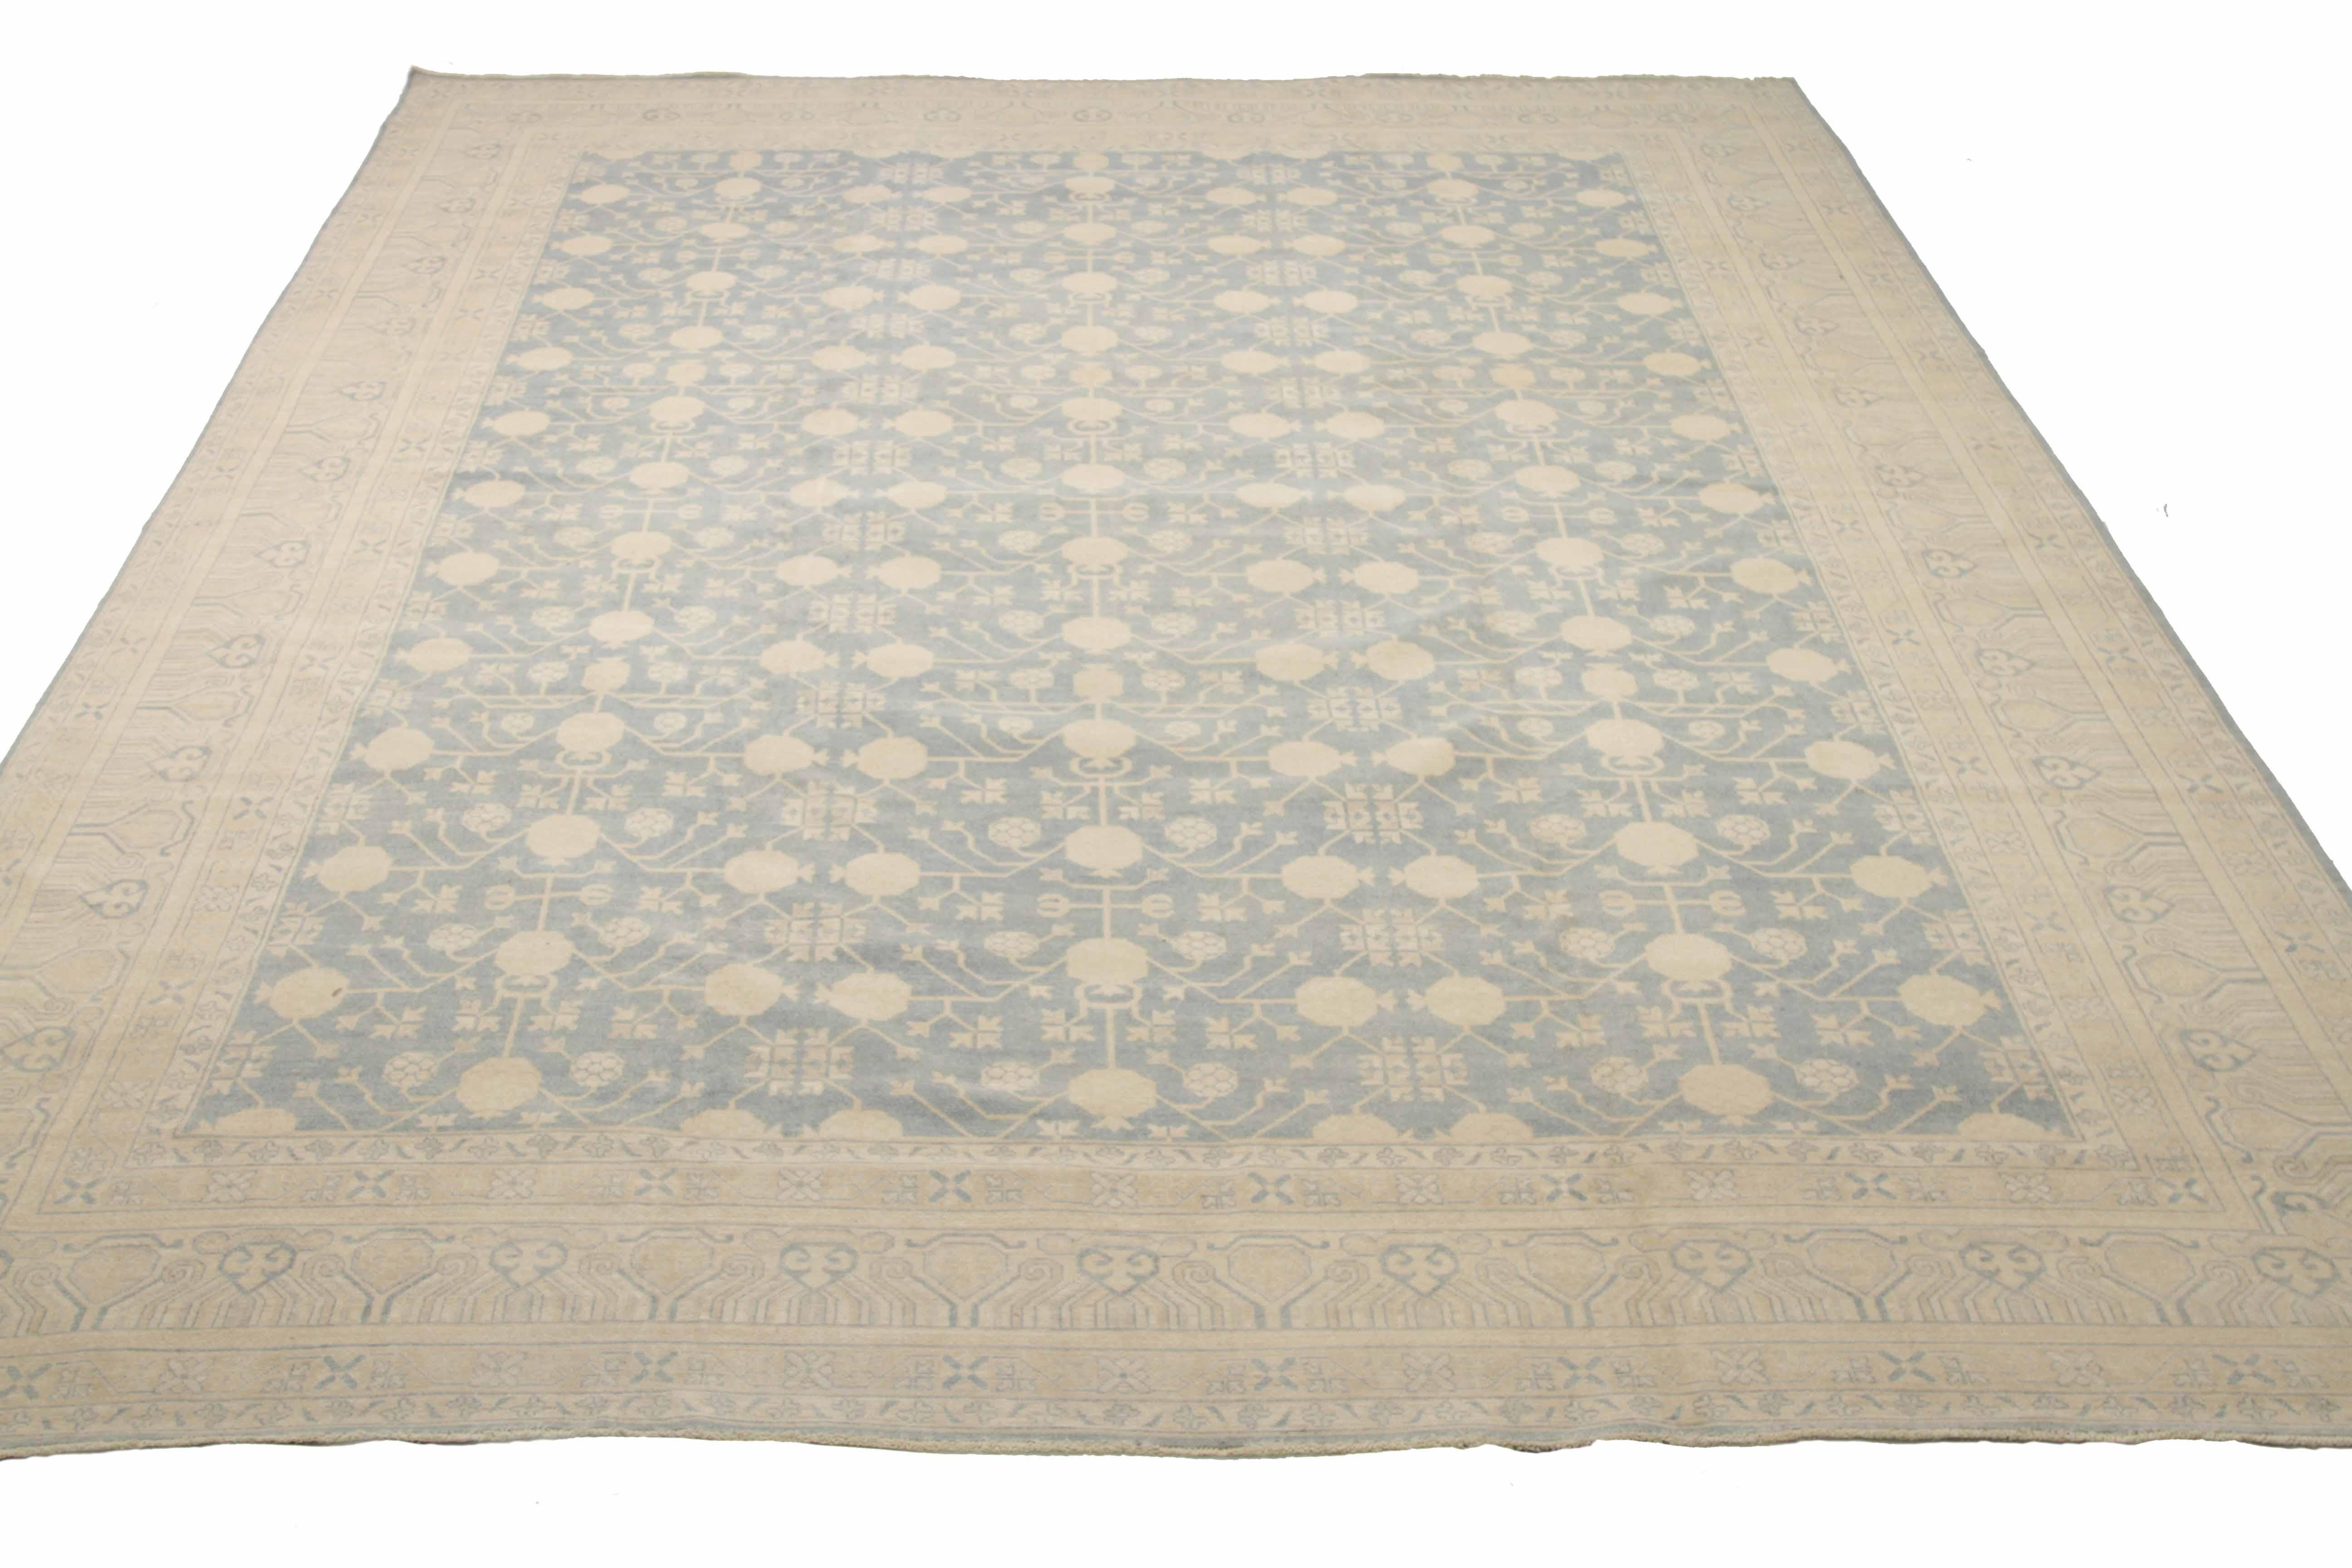 New area rug handwoven from the finest sheep’s wool. It’s colored with all-natural vegetable dyes that are safe for humans and pets. It’s a traditional Khotan design handwoven by expert artisans. It’s a lovely area rug that can be incorporated with